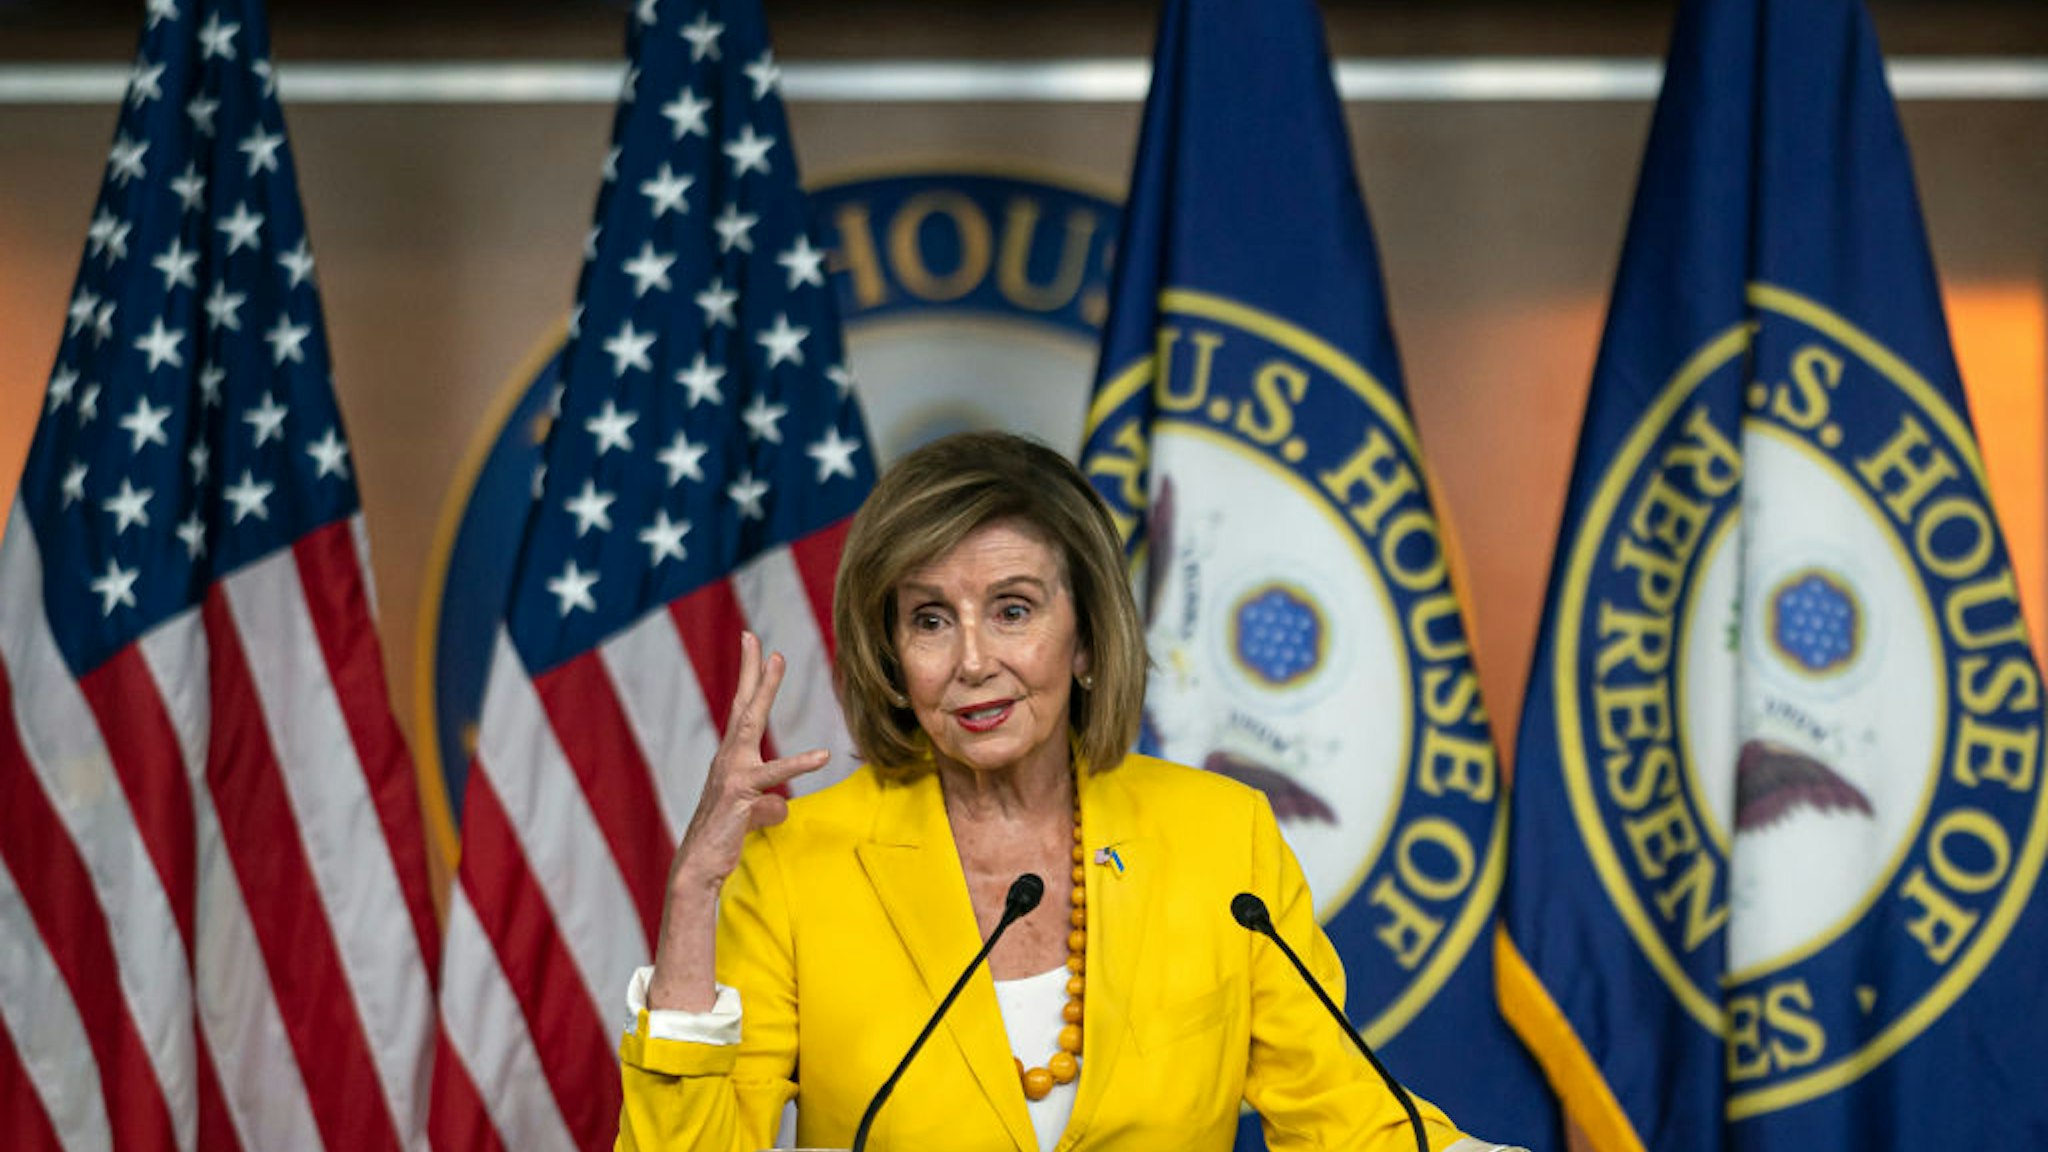 WASHINGTON, DC - JULY 21: U.S. Speaker of the House Nancy Pelosi (D-CA) holds her weekly press conference at the U.S. Capitol on July 21, 2022 in Washington, DC. Pelosi was asked about President Bidens COVID-19 diagnosis, reproductive rights, and the recent joint session with Ukrainian first lady Olena Zelenska.